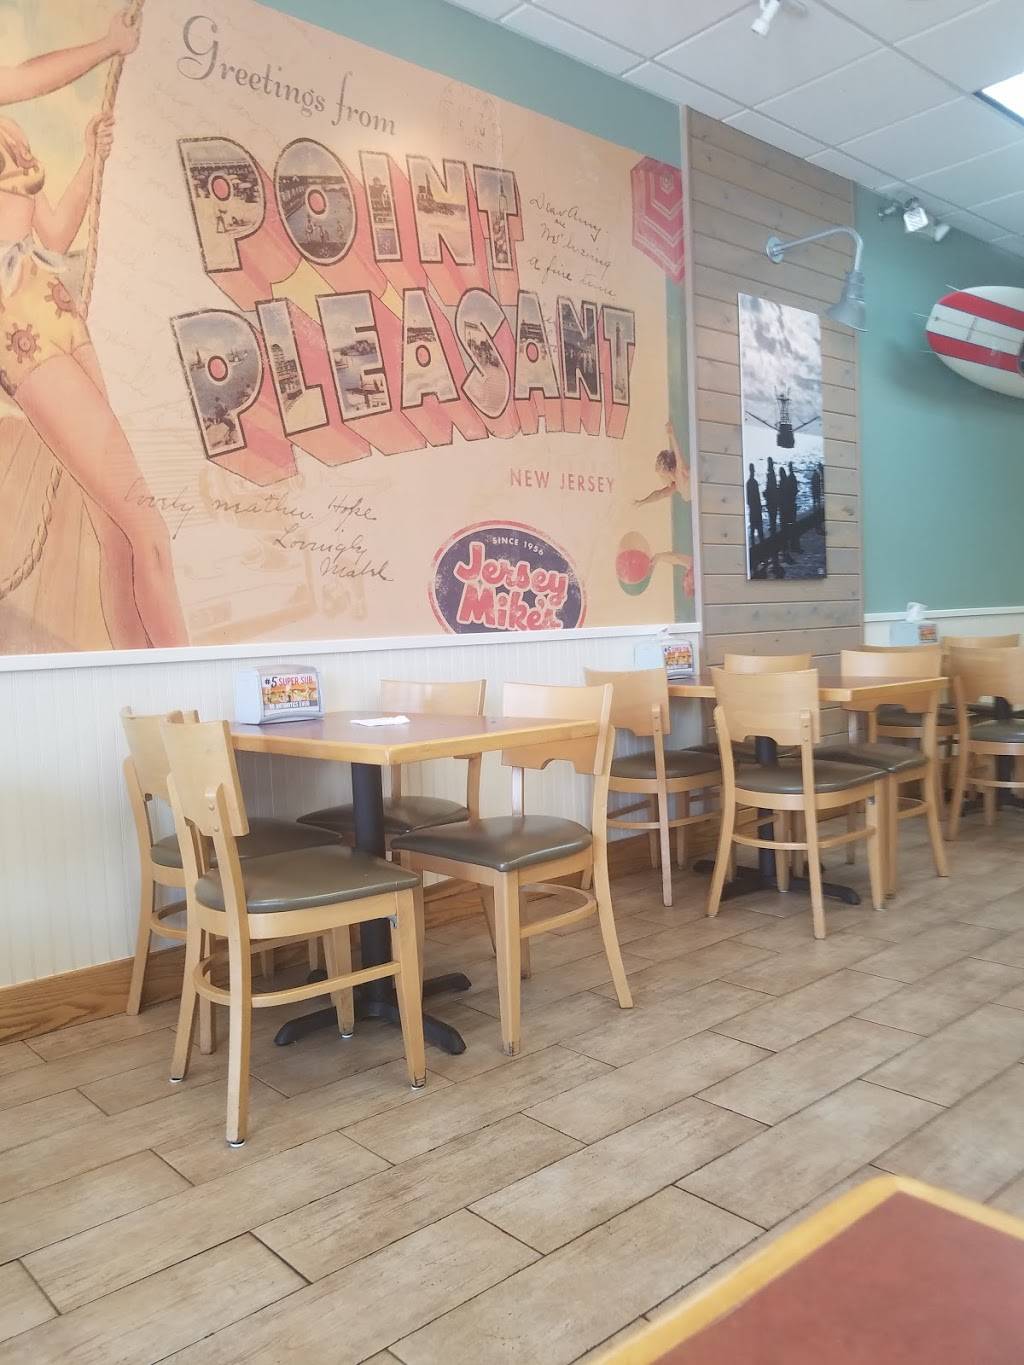 jersey mike's waterford lakes